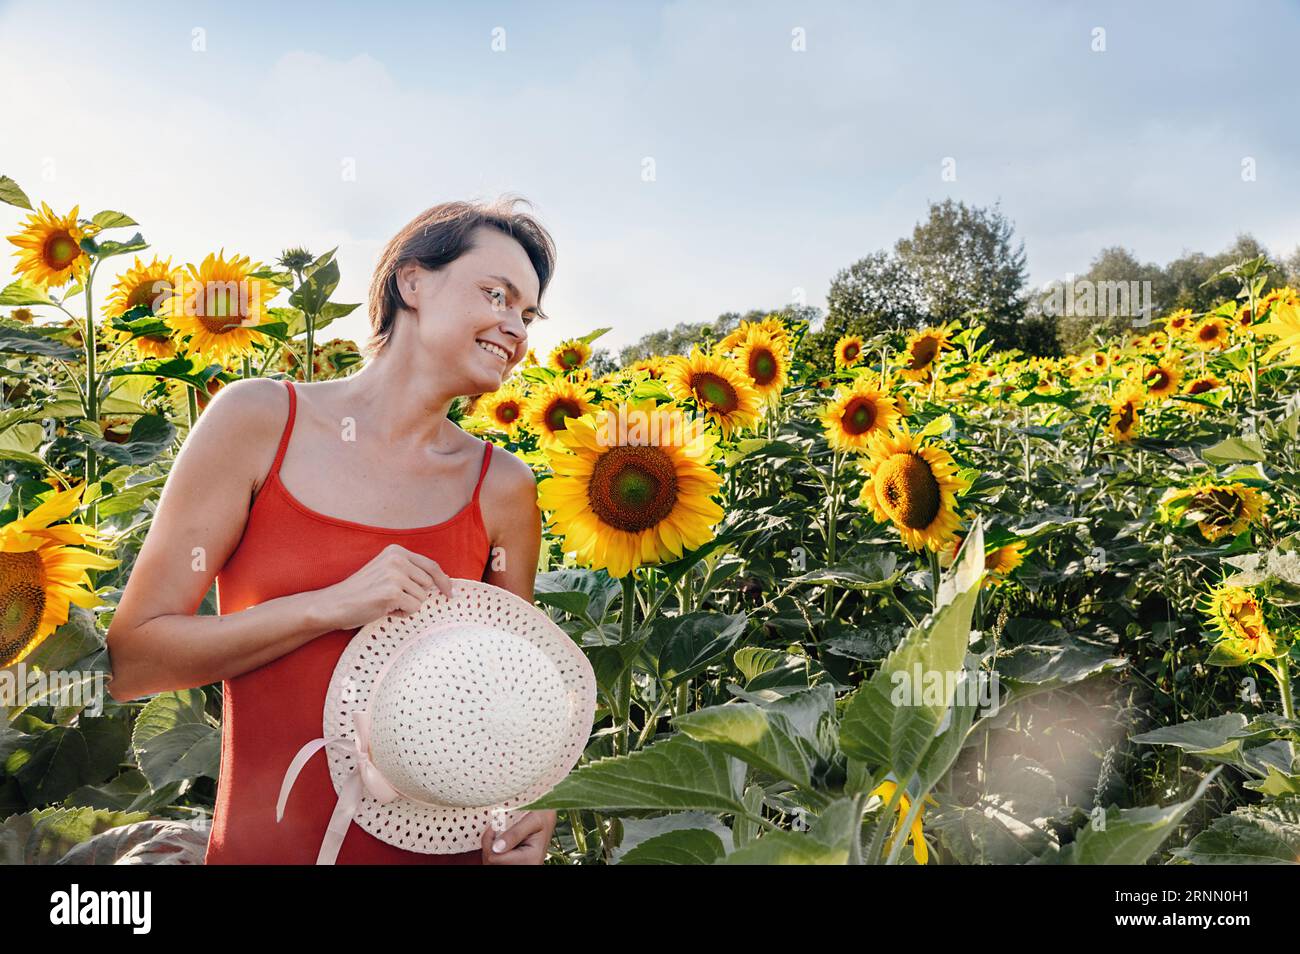 Beautiful woman posing in a field of sunflowers in a dress and hat. Fashion, lifestyle, travel and vacations concept. Stock Photo